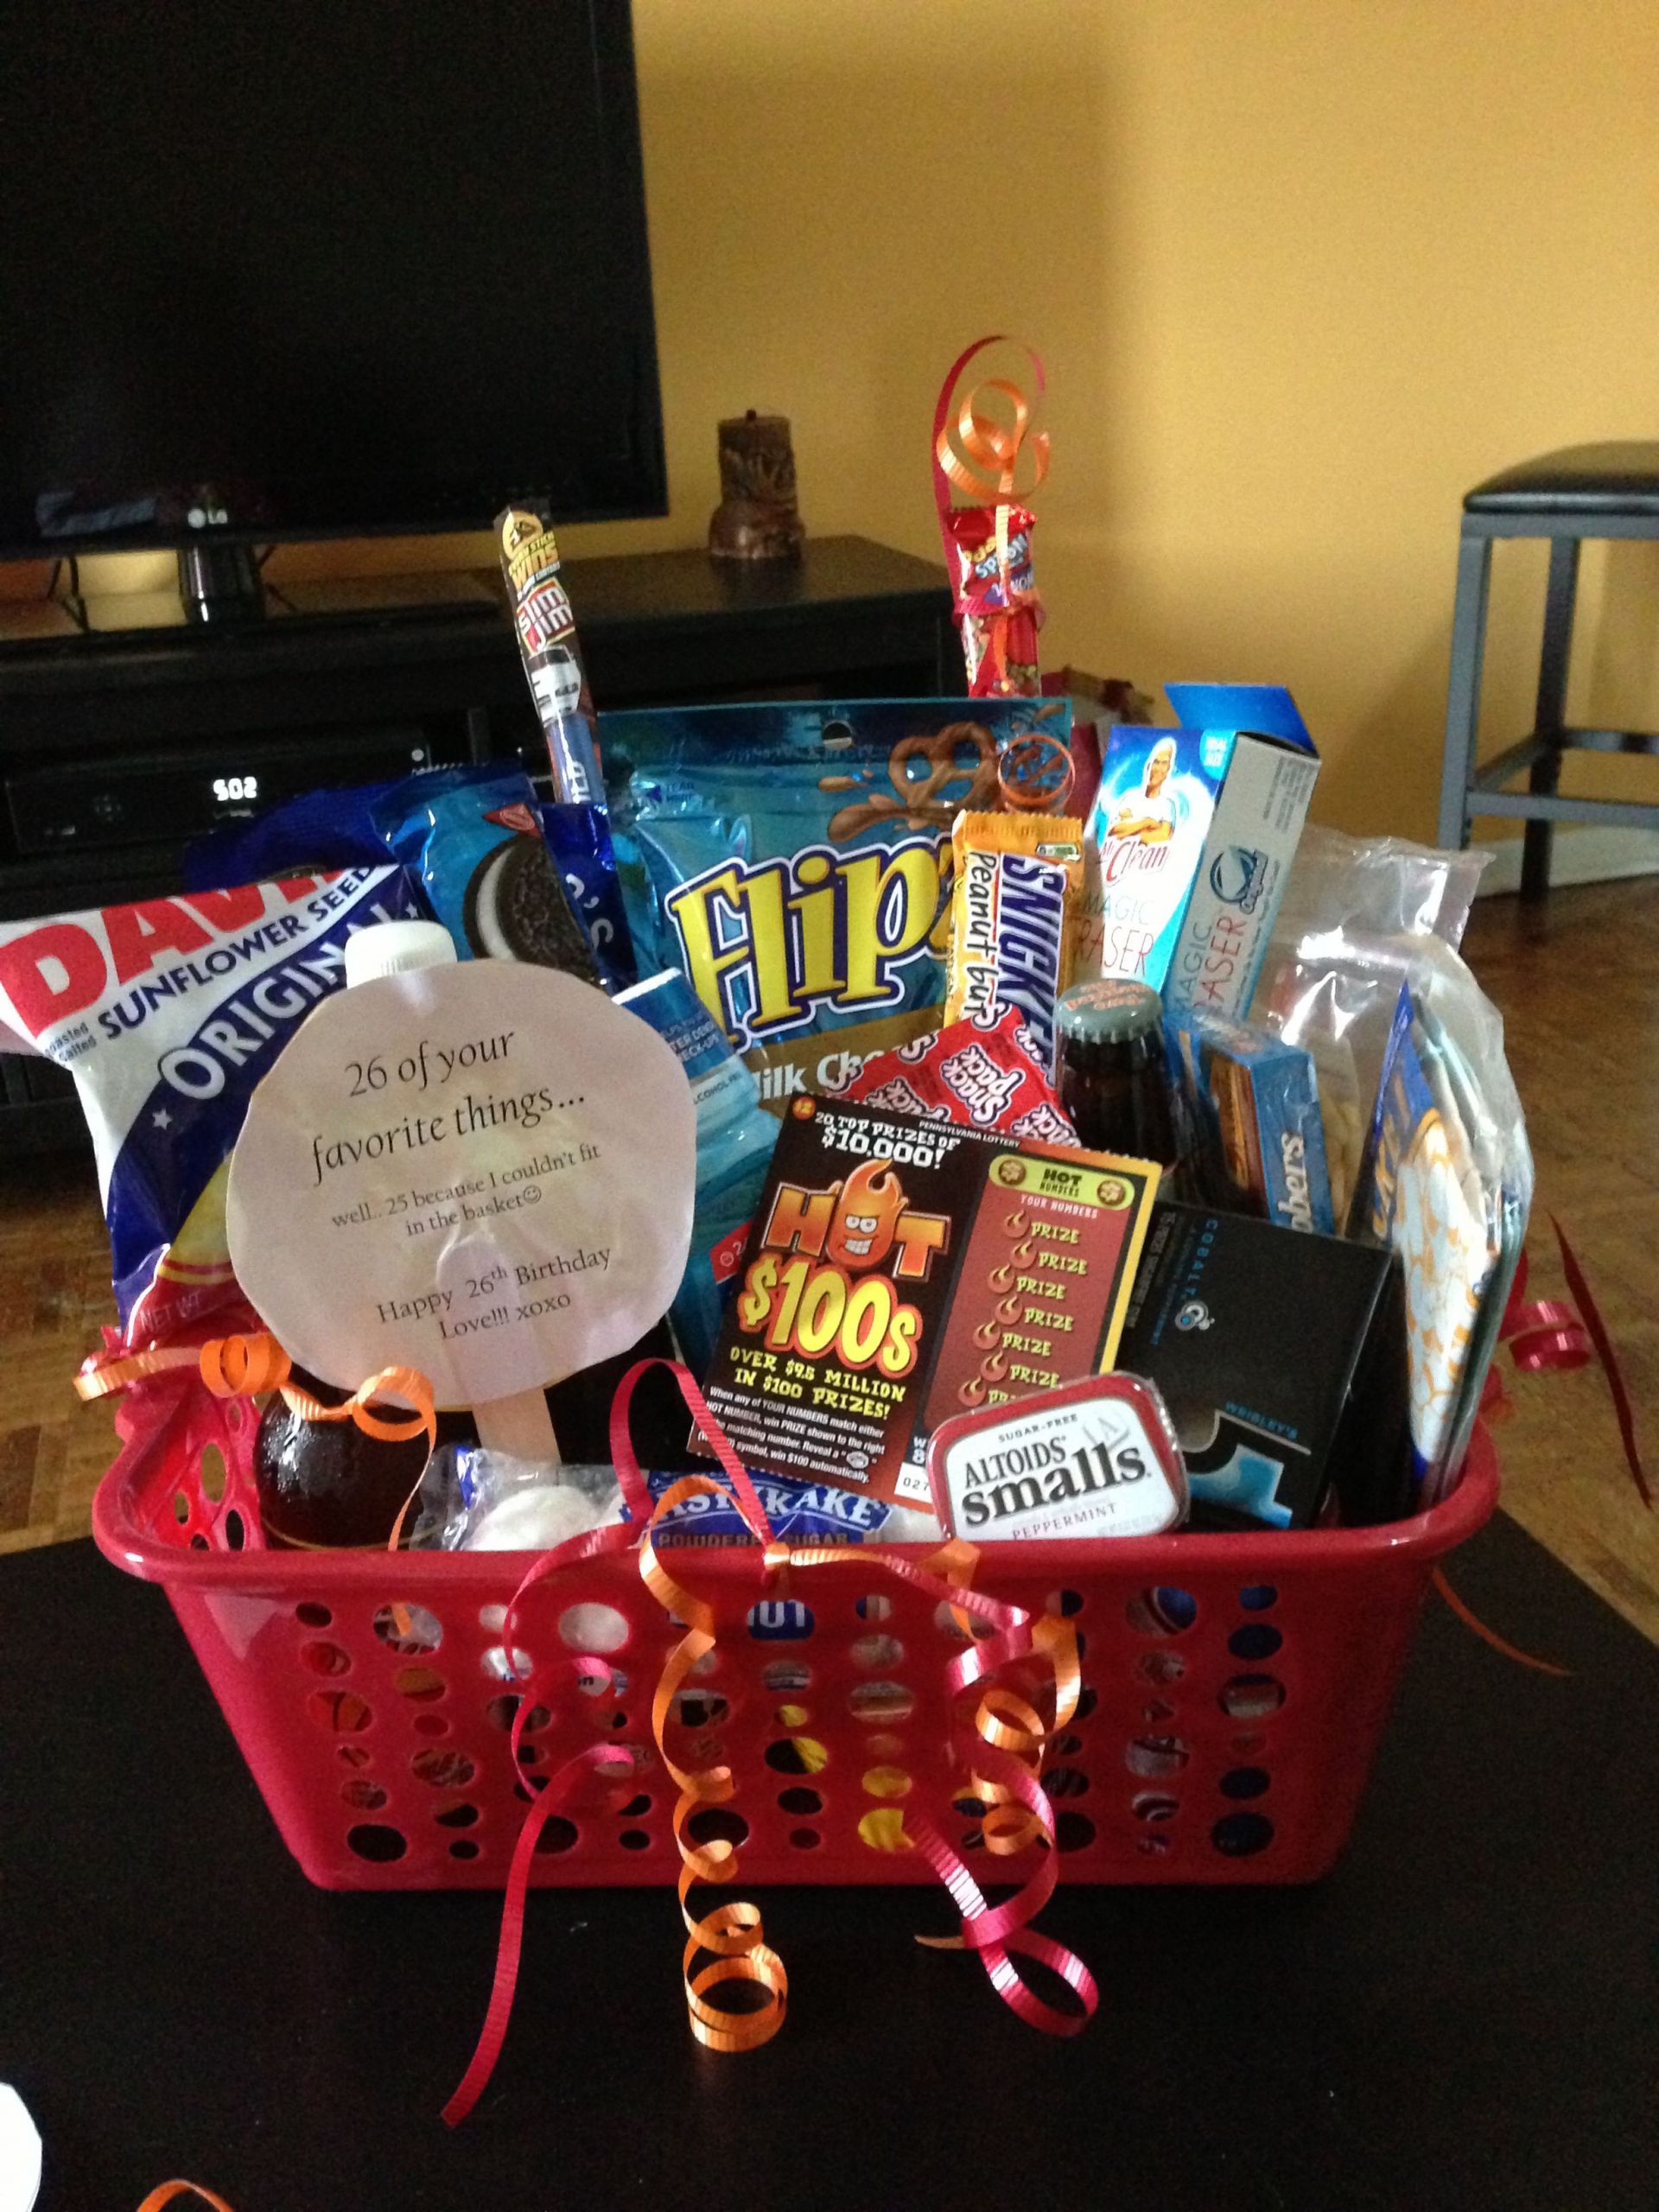 26 Year Anniversary Gift Ideas
 Boyfriend birthday basket 26 of his favorite things for